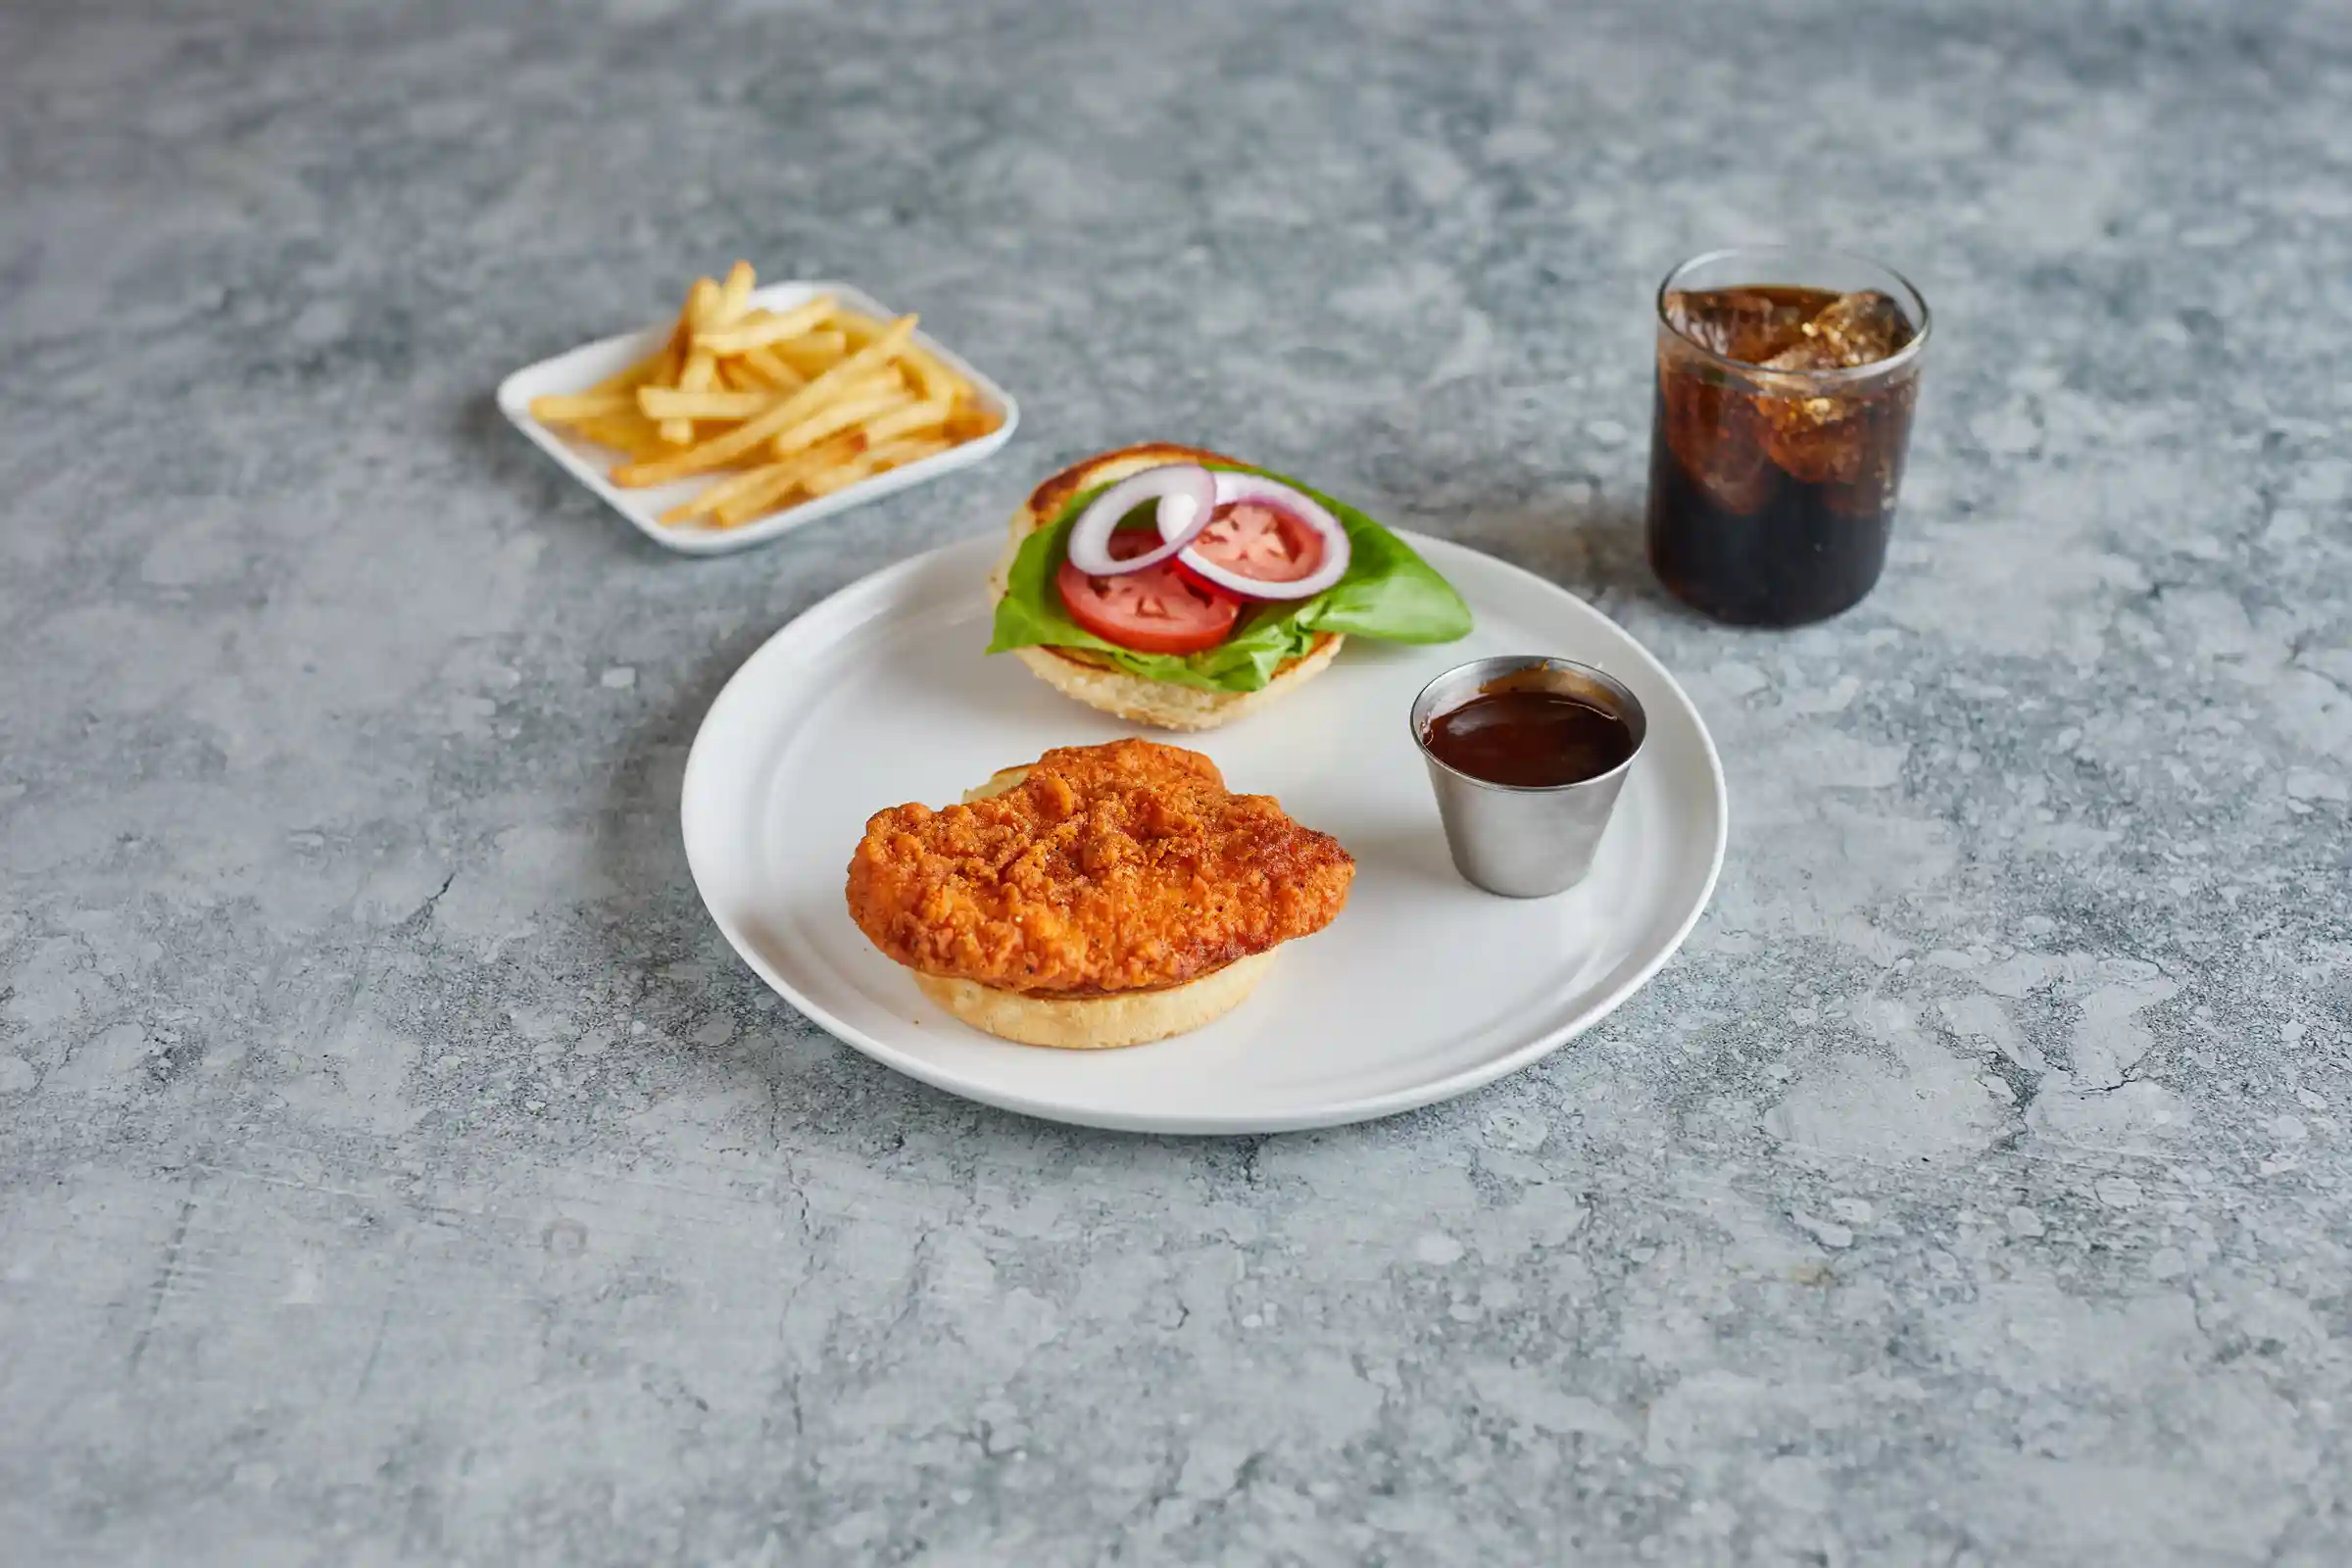 Tyson Red Label® Fully Cooked Hot & Spicy Chicken Breast Filet Fritters, 4 oz. https://images.salsify.com/image/upload/s--Cit8FivQ--/q_25/tizefw0w3pukqqxo9wcr.webp